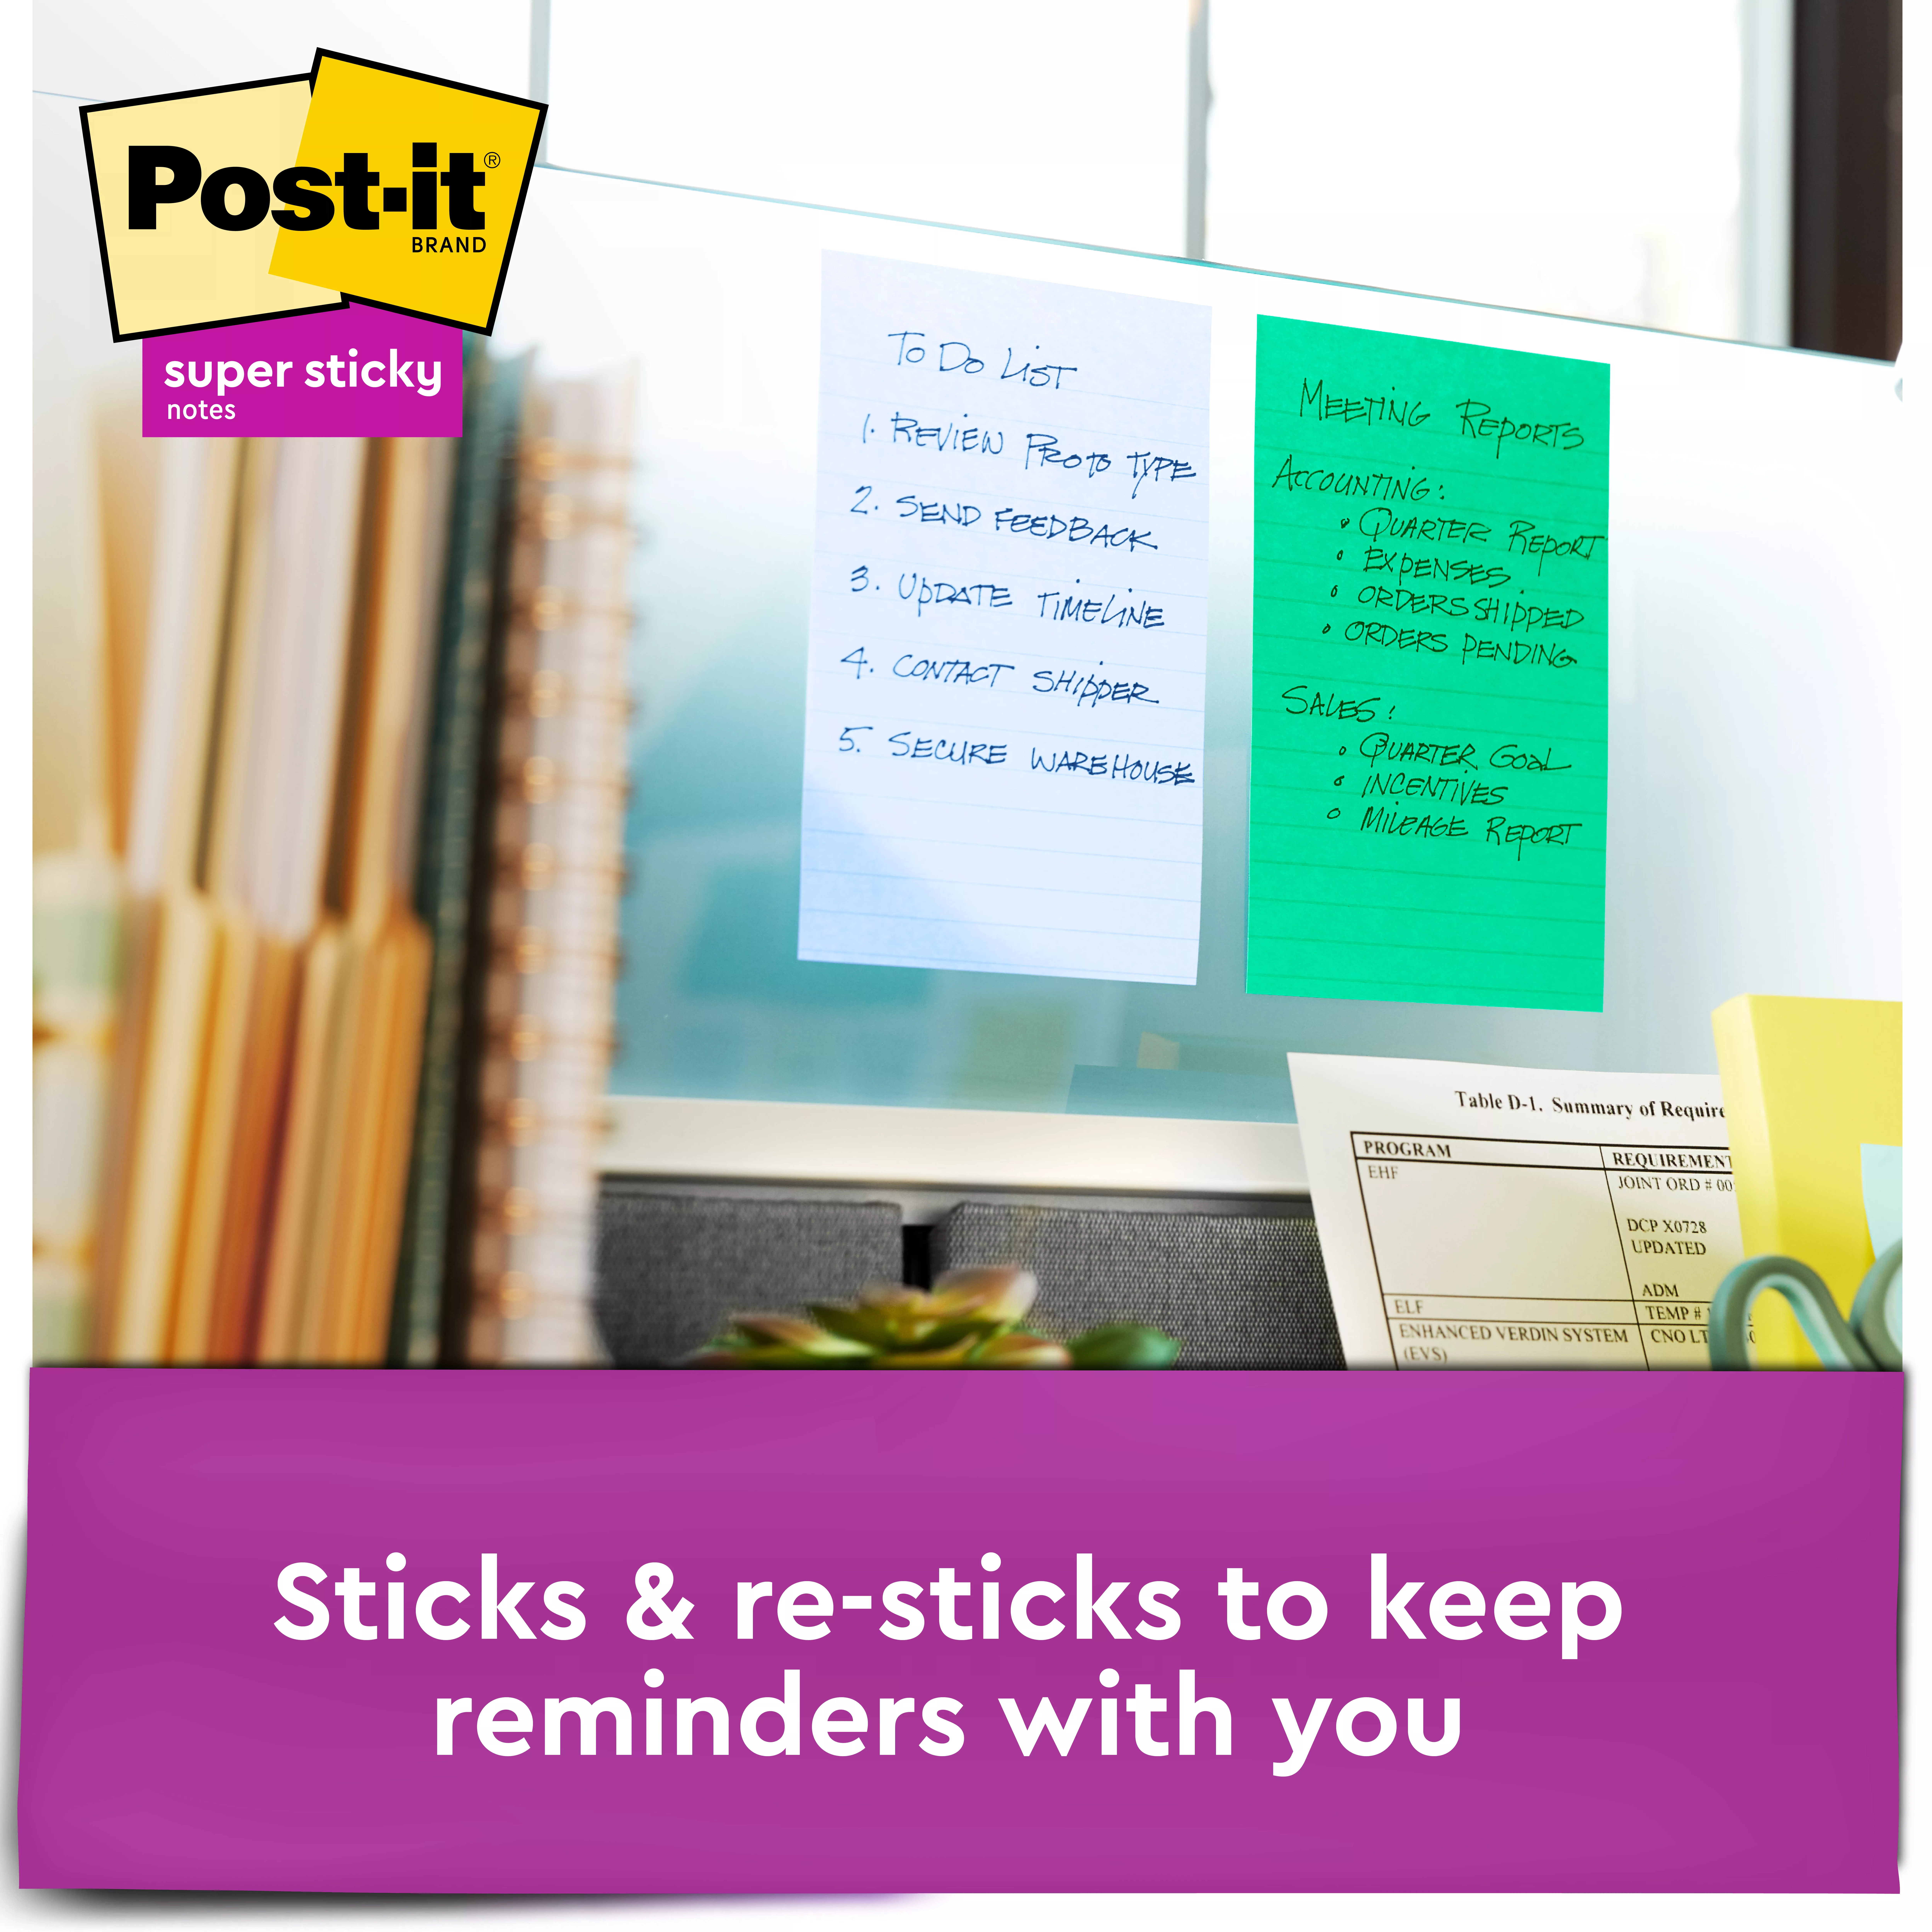 Product Number 660-3SST | Post-it® Super Sticky Recycled Notes 660-3SST